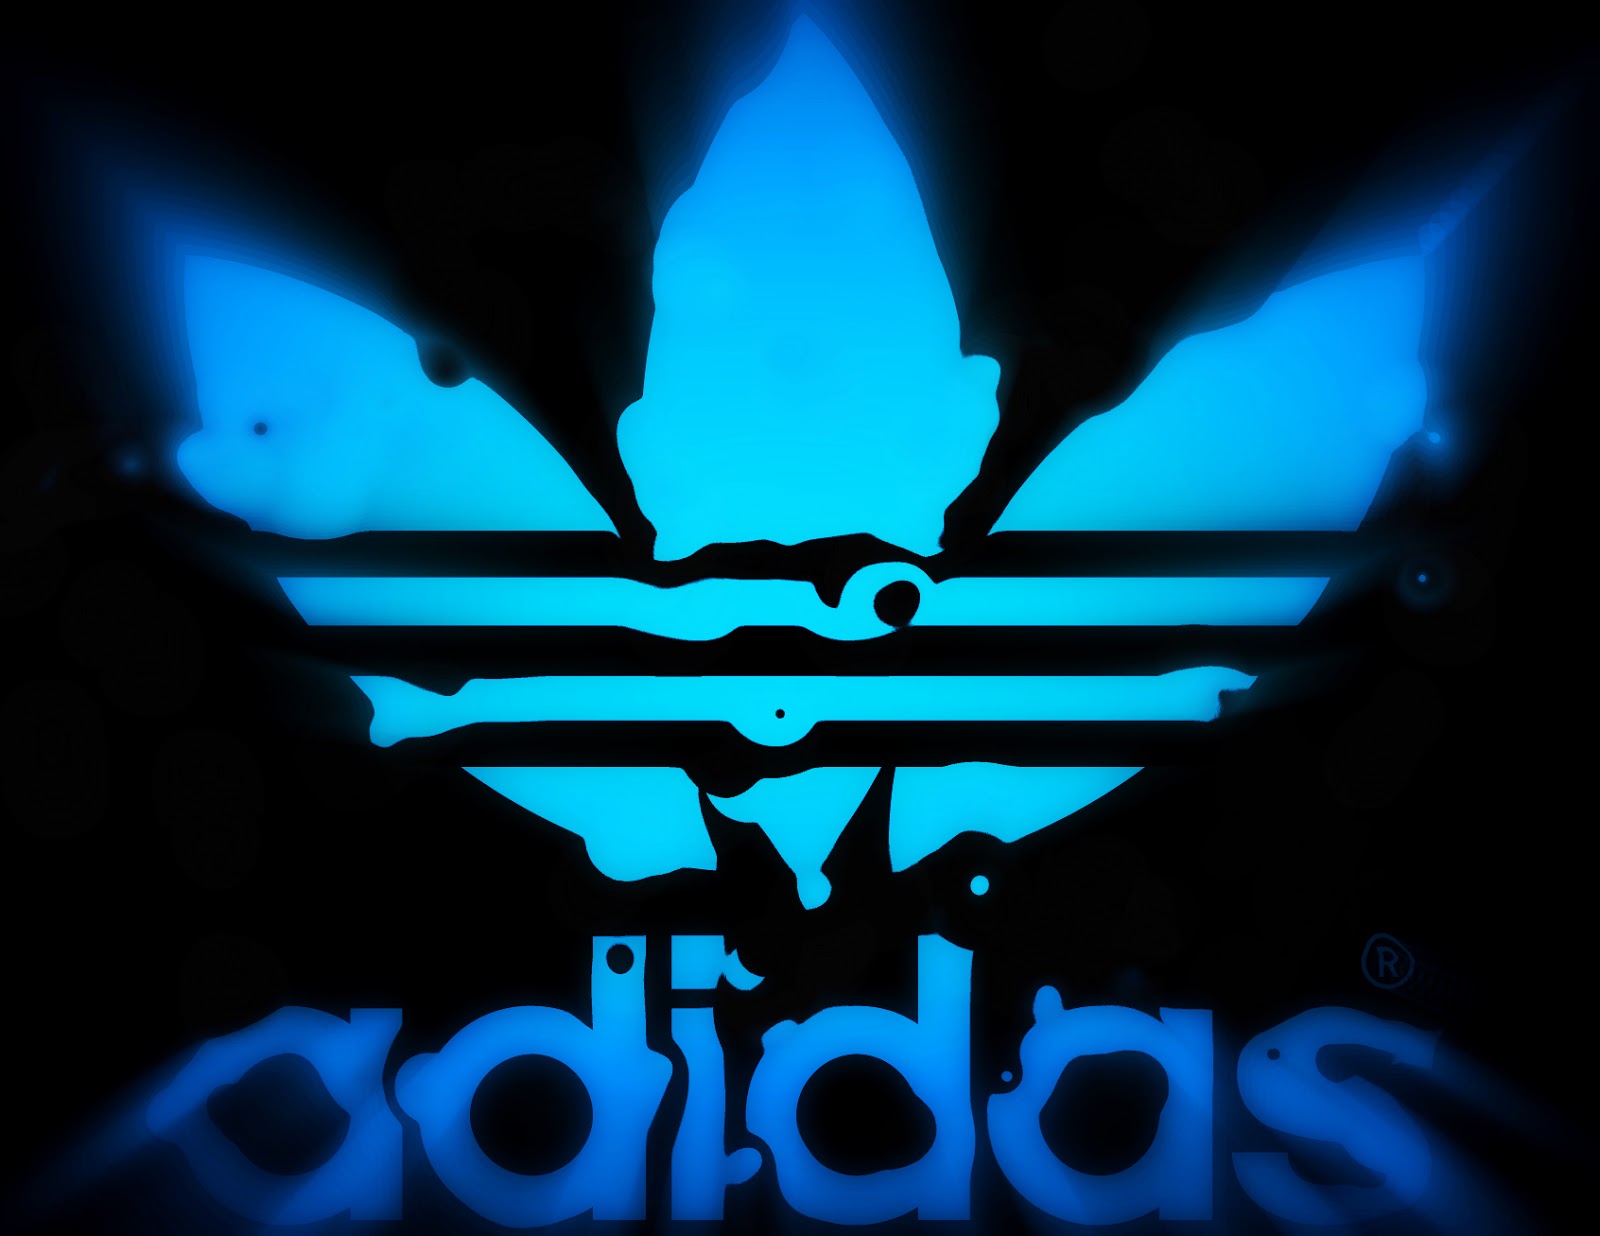 adidas t shirt in roblox